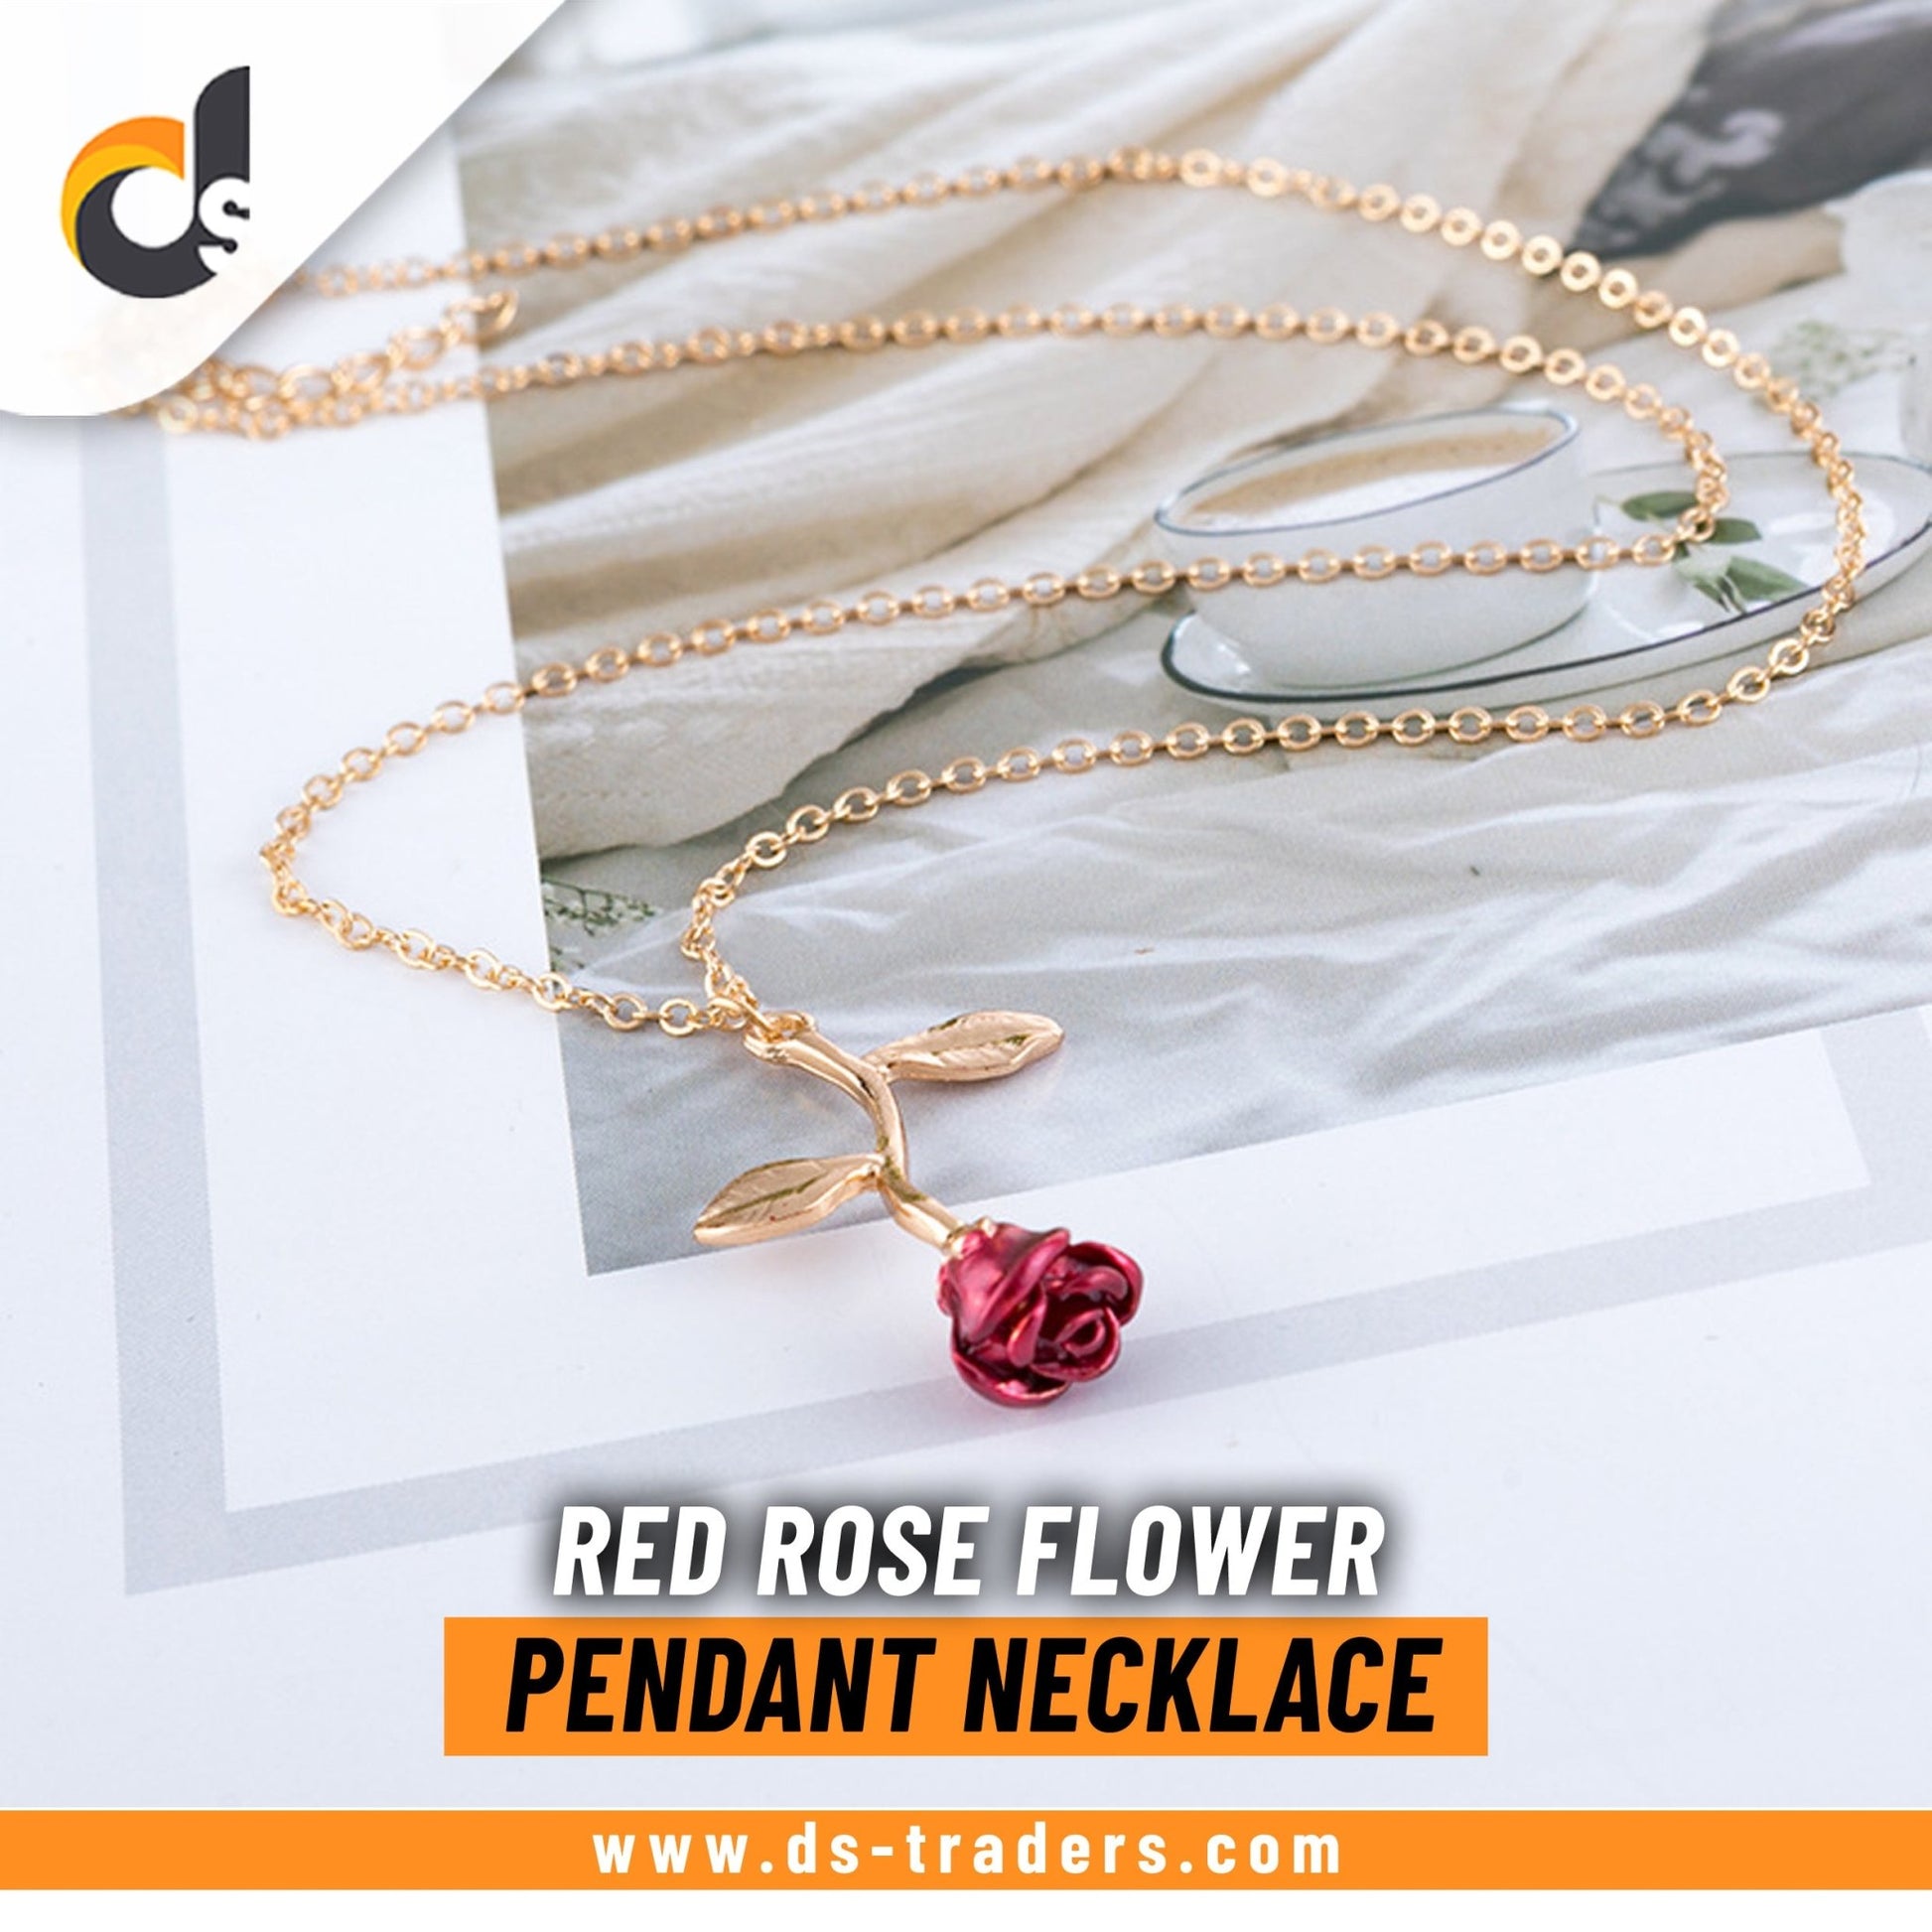 Red Rose Flower Pendant Necklace - DS Traders